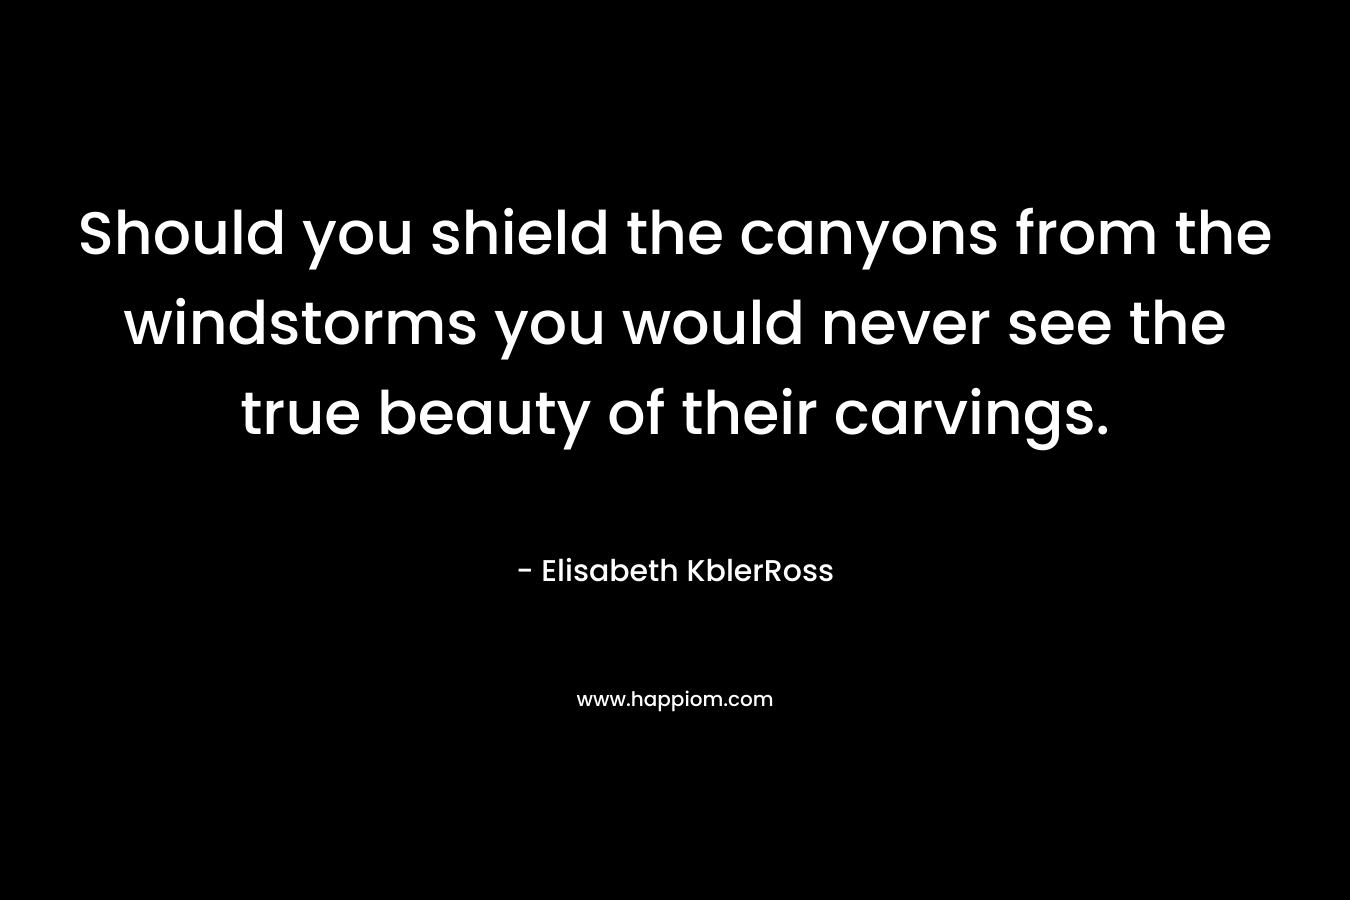 Should you shield the canyons from the windstorms you would never see the true beauty of their carvings.